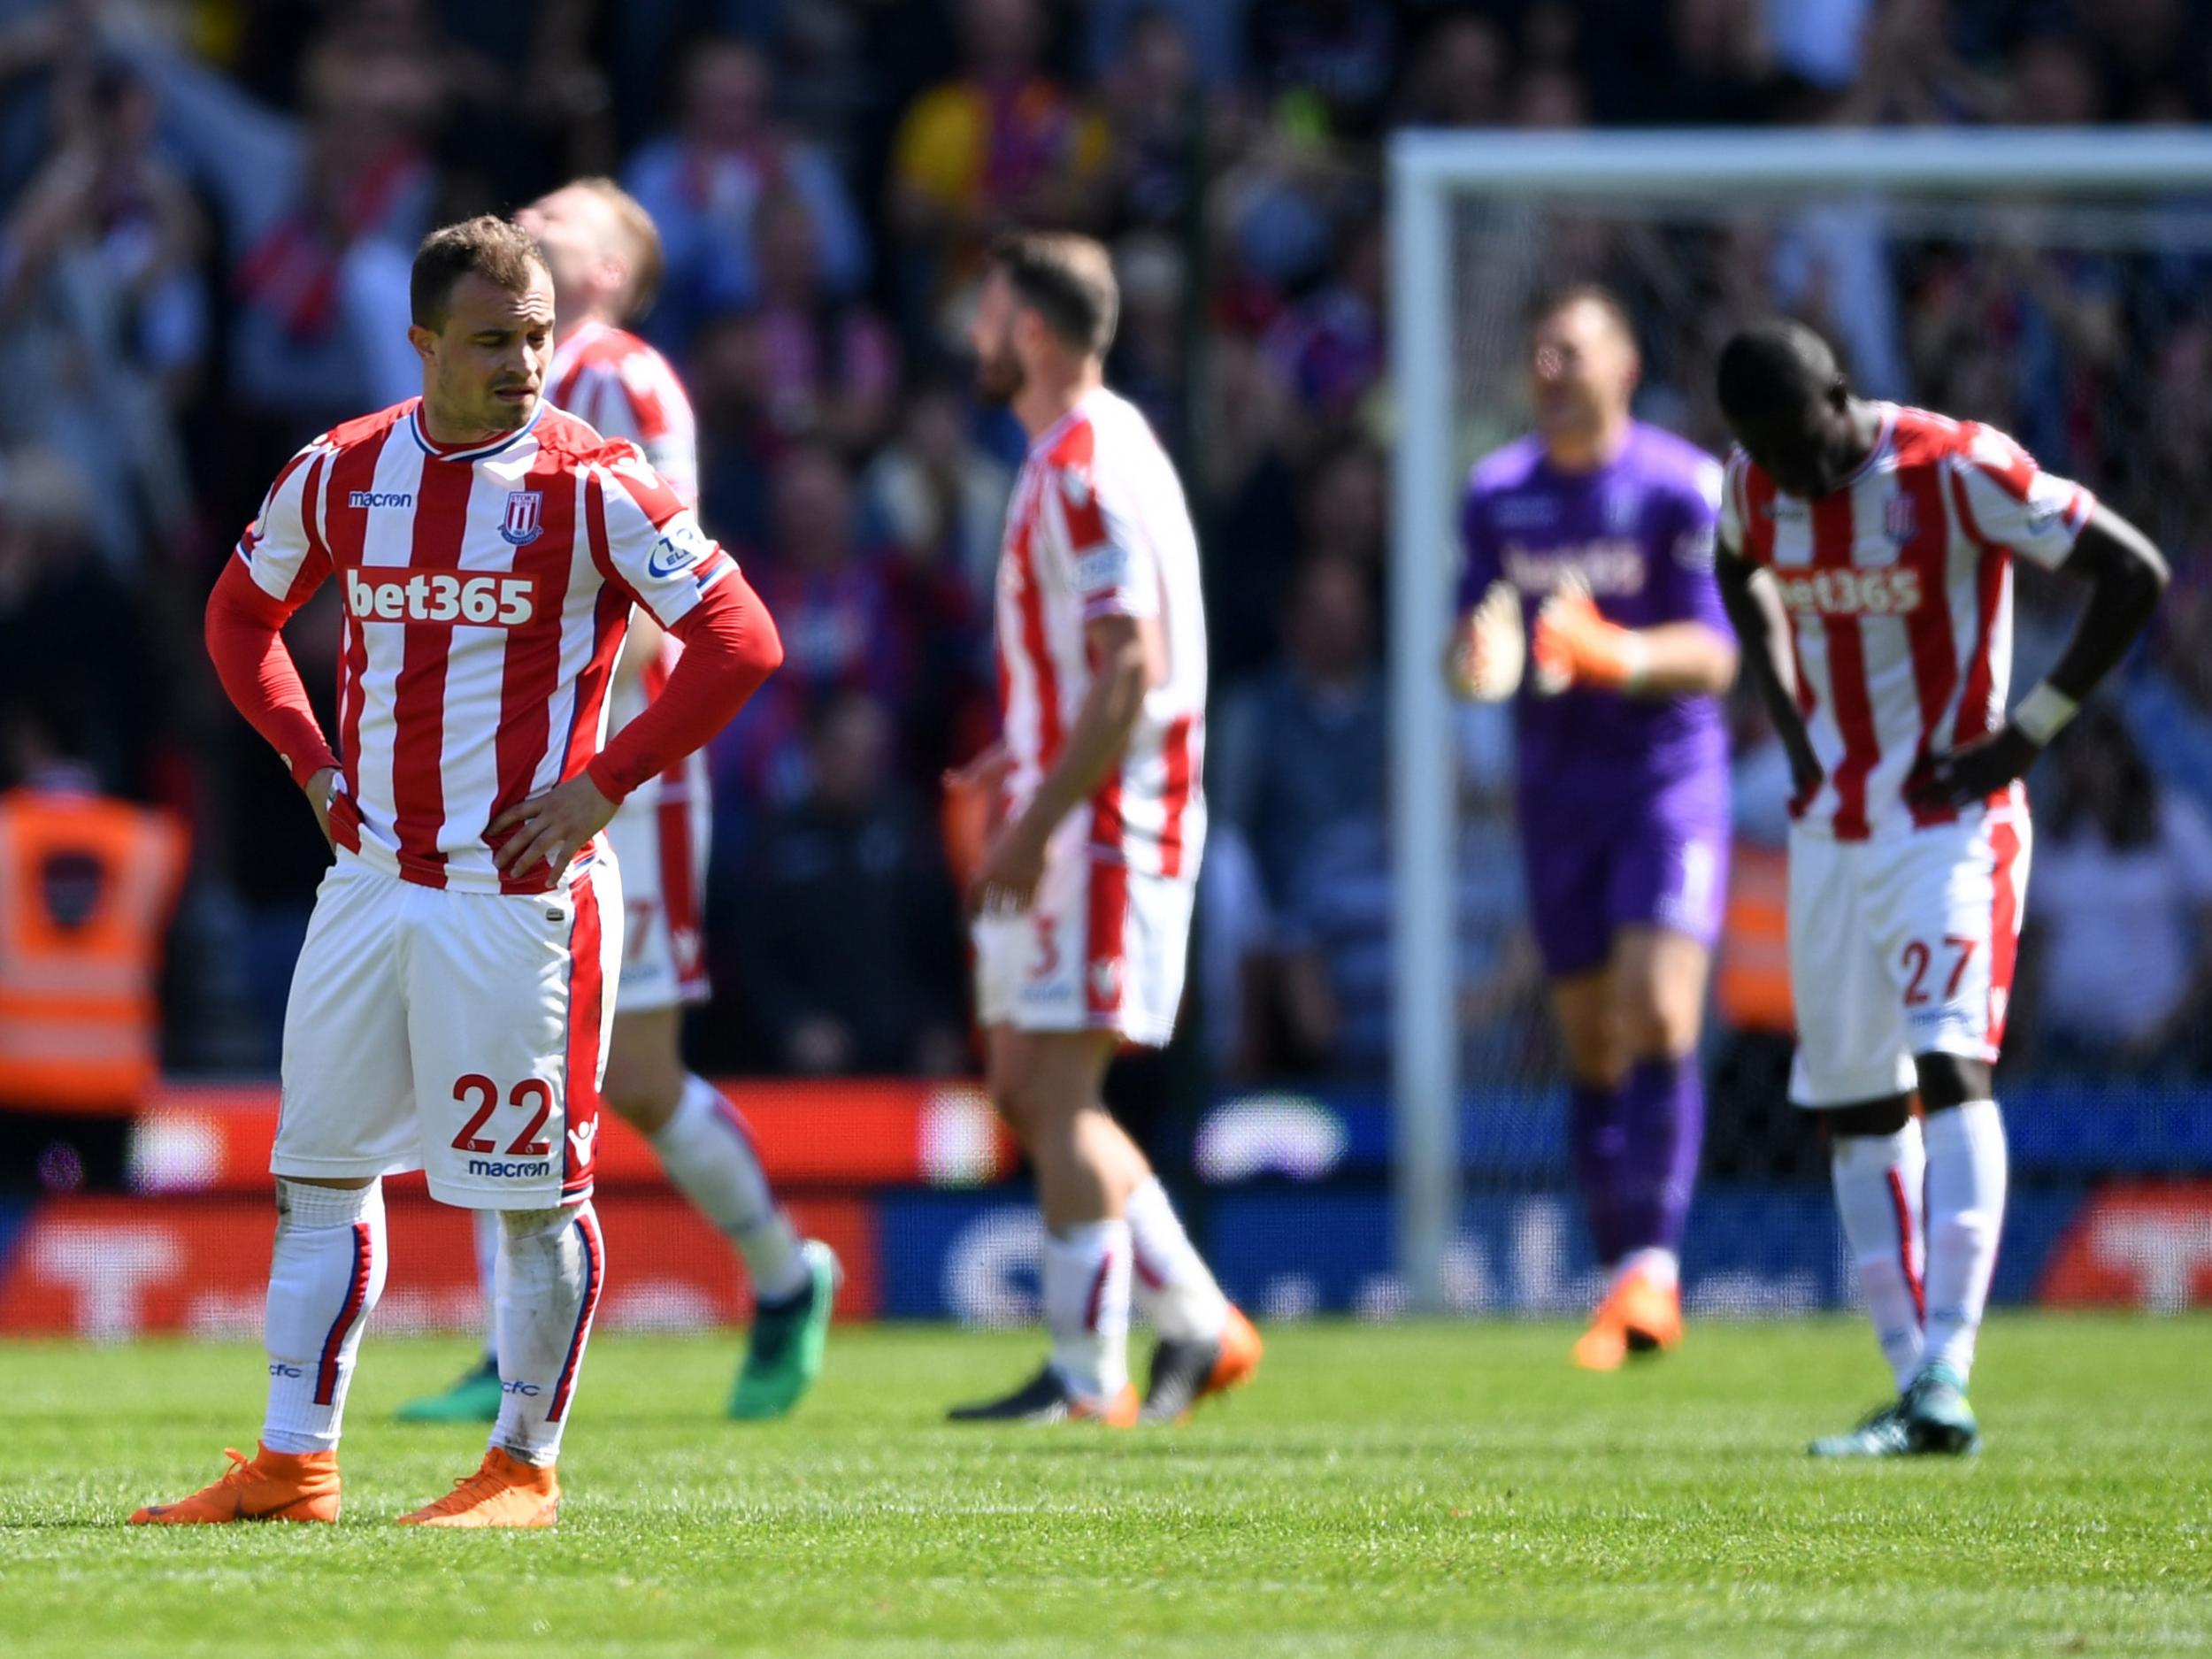 Stoke were relegated at the final whistle